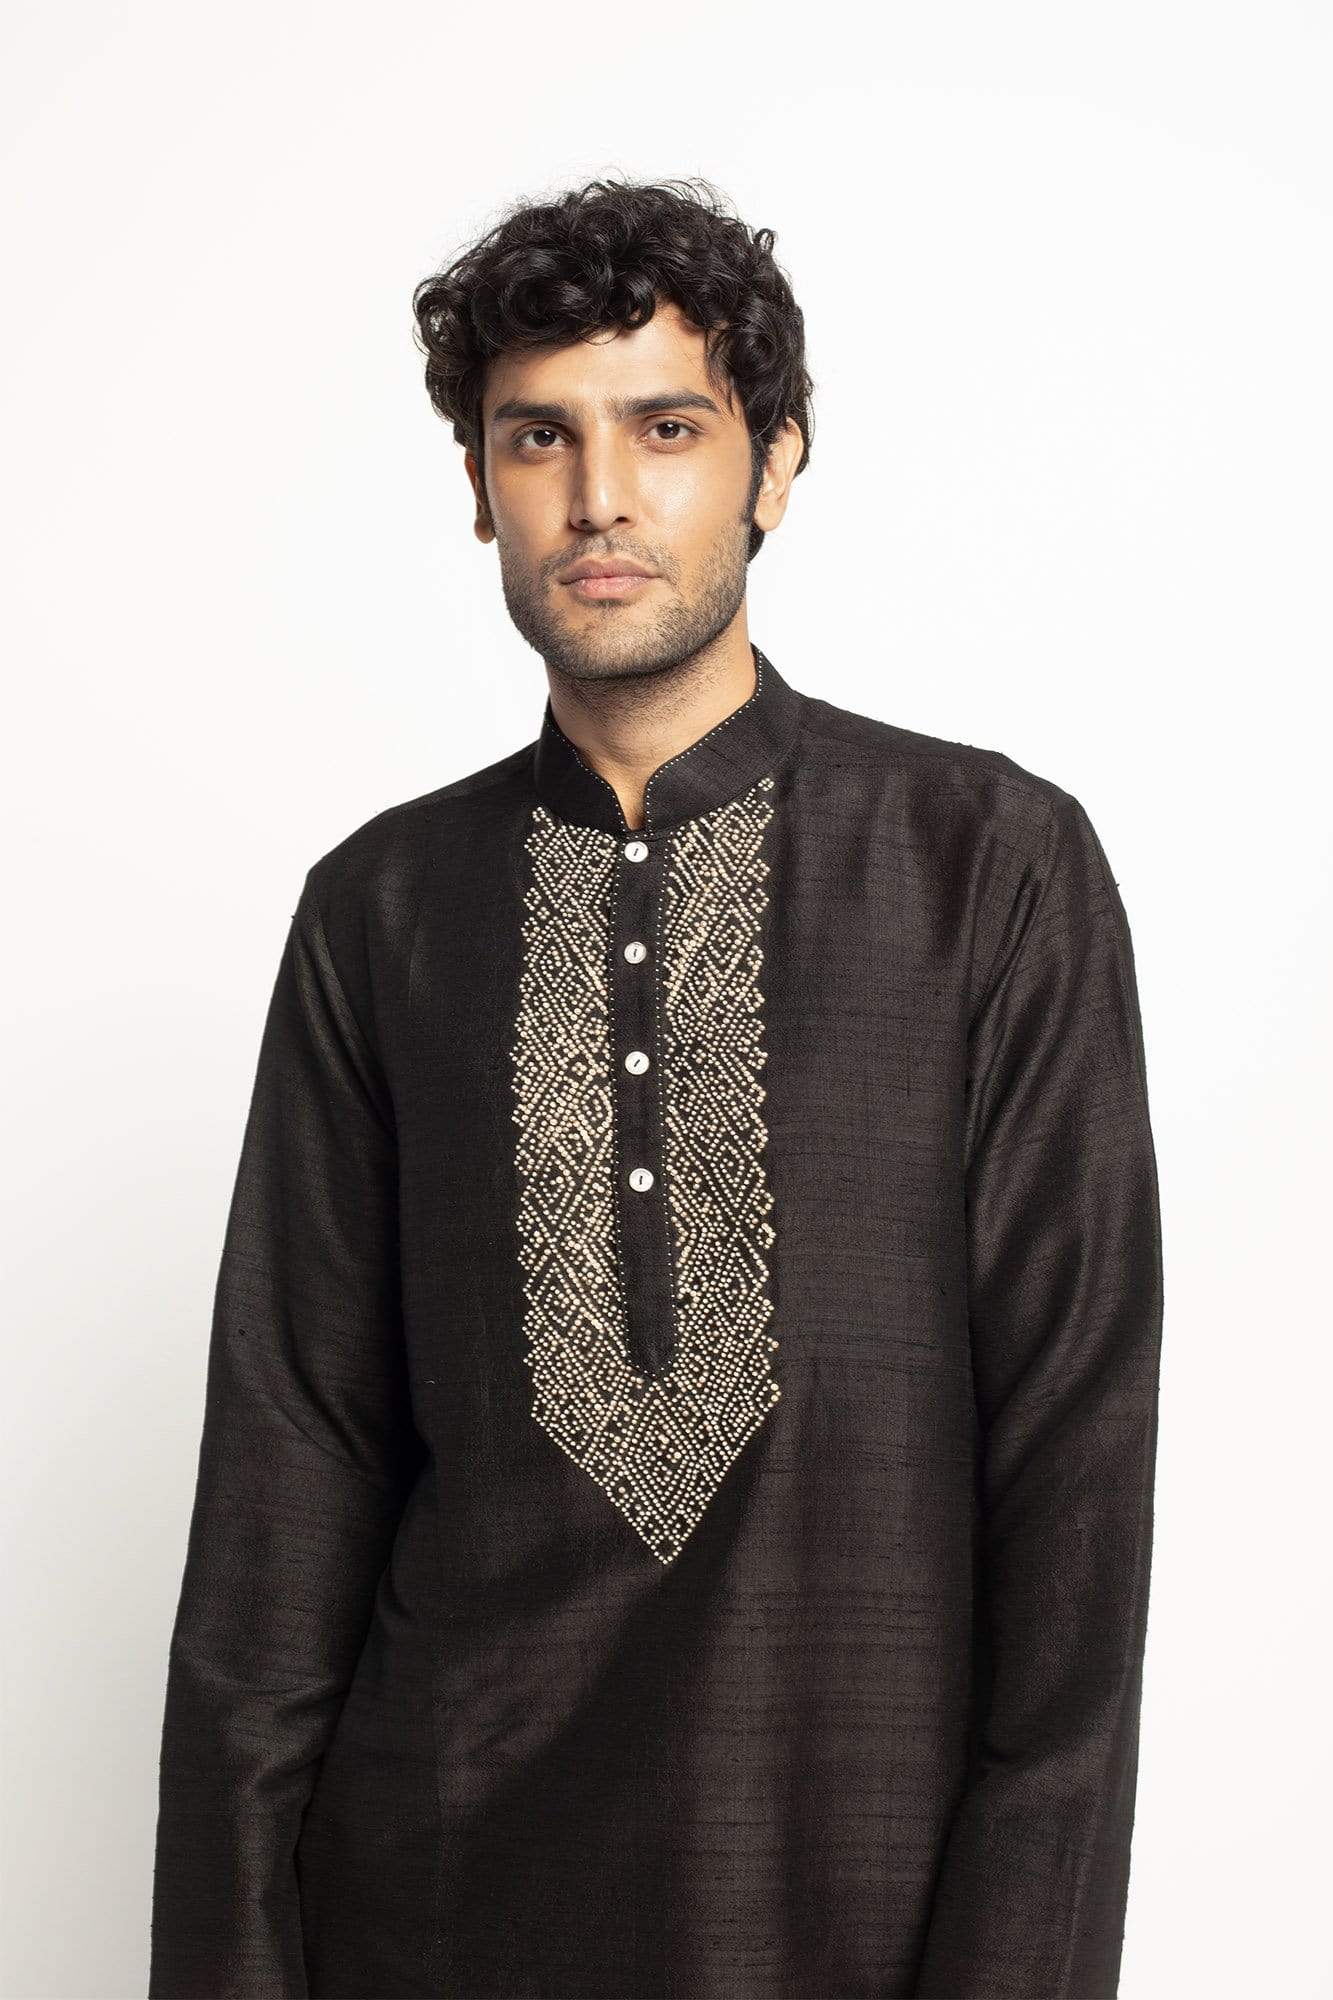 Knot Embroidery Kurta Set Indian Clothing in Denver, CO, Aurora, CO, Boulder, CO, Fort Collins, CO, Colorado Springs, CO, Parker, CO, Highlands Ranch, CO, Cherry Creek, CO, Centennial, CO, and Longmont, CO. NATIONWIDE SHIPPING USA- India Fashion X